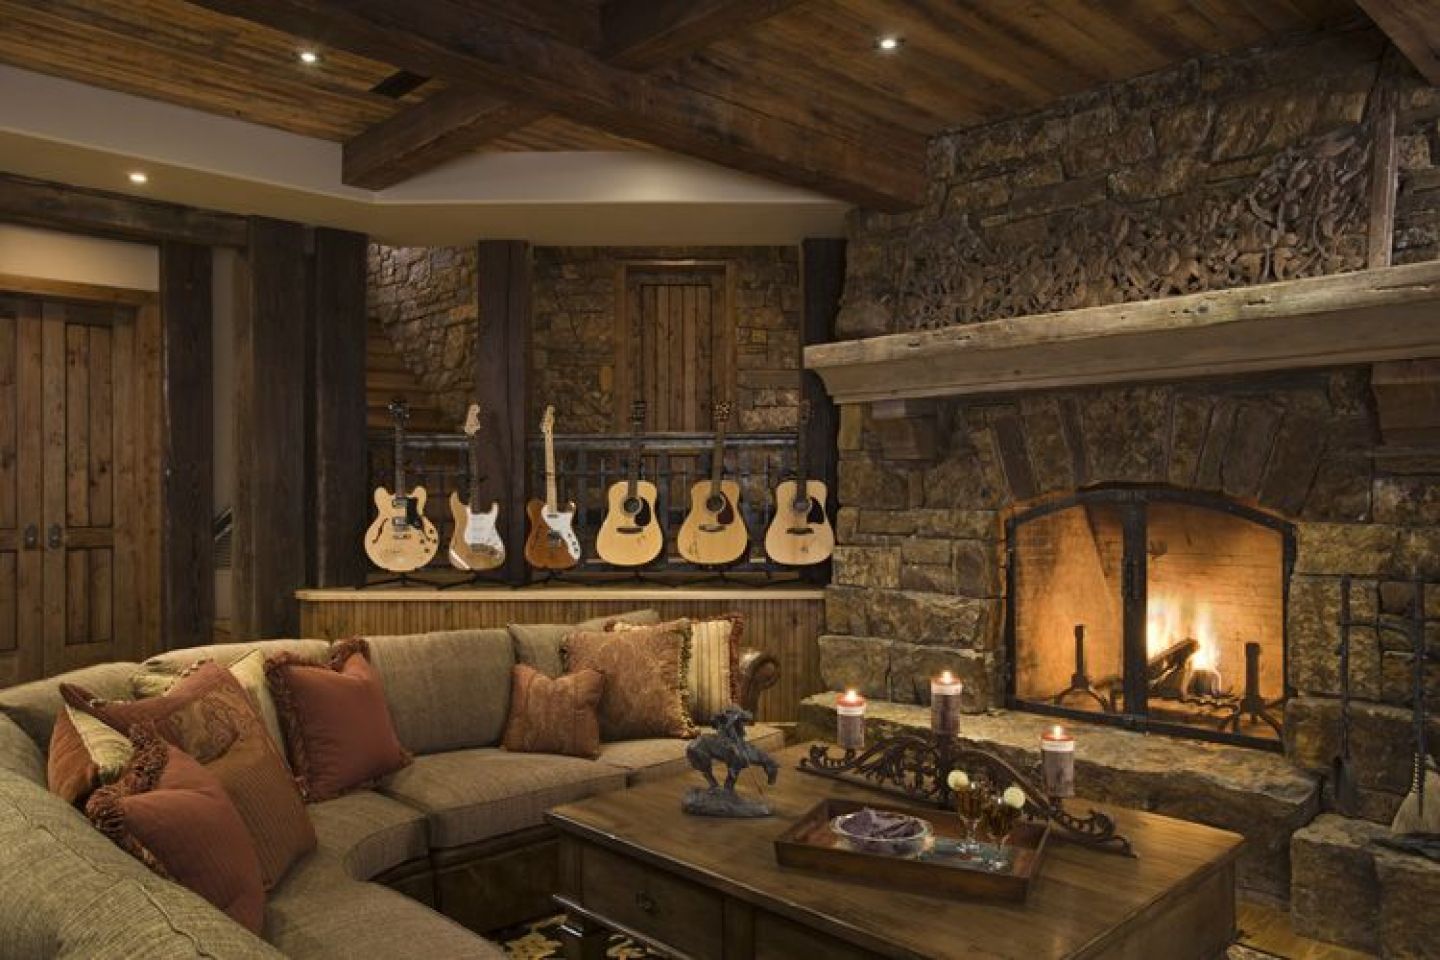 Of A Living View Of A Sophisticated Rustic Living Room With Wooden Coffee Table Stone Walls Couches With Pillows And Guitar Shelves Living Room Majestic Rustic Living Room With Delicate Beauty